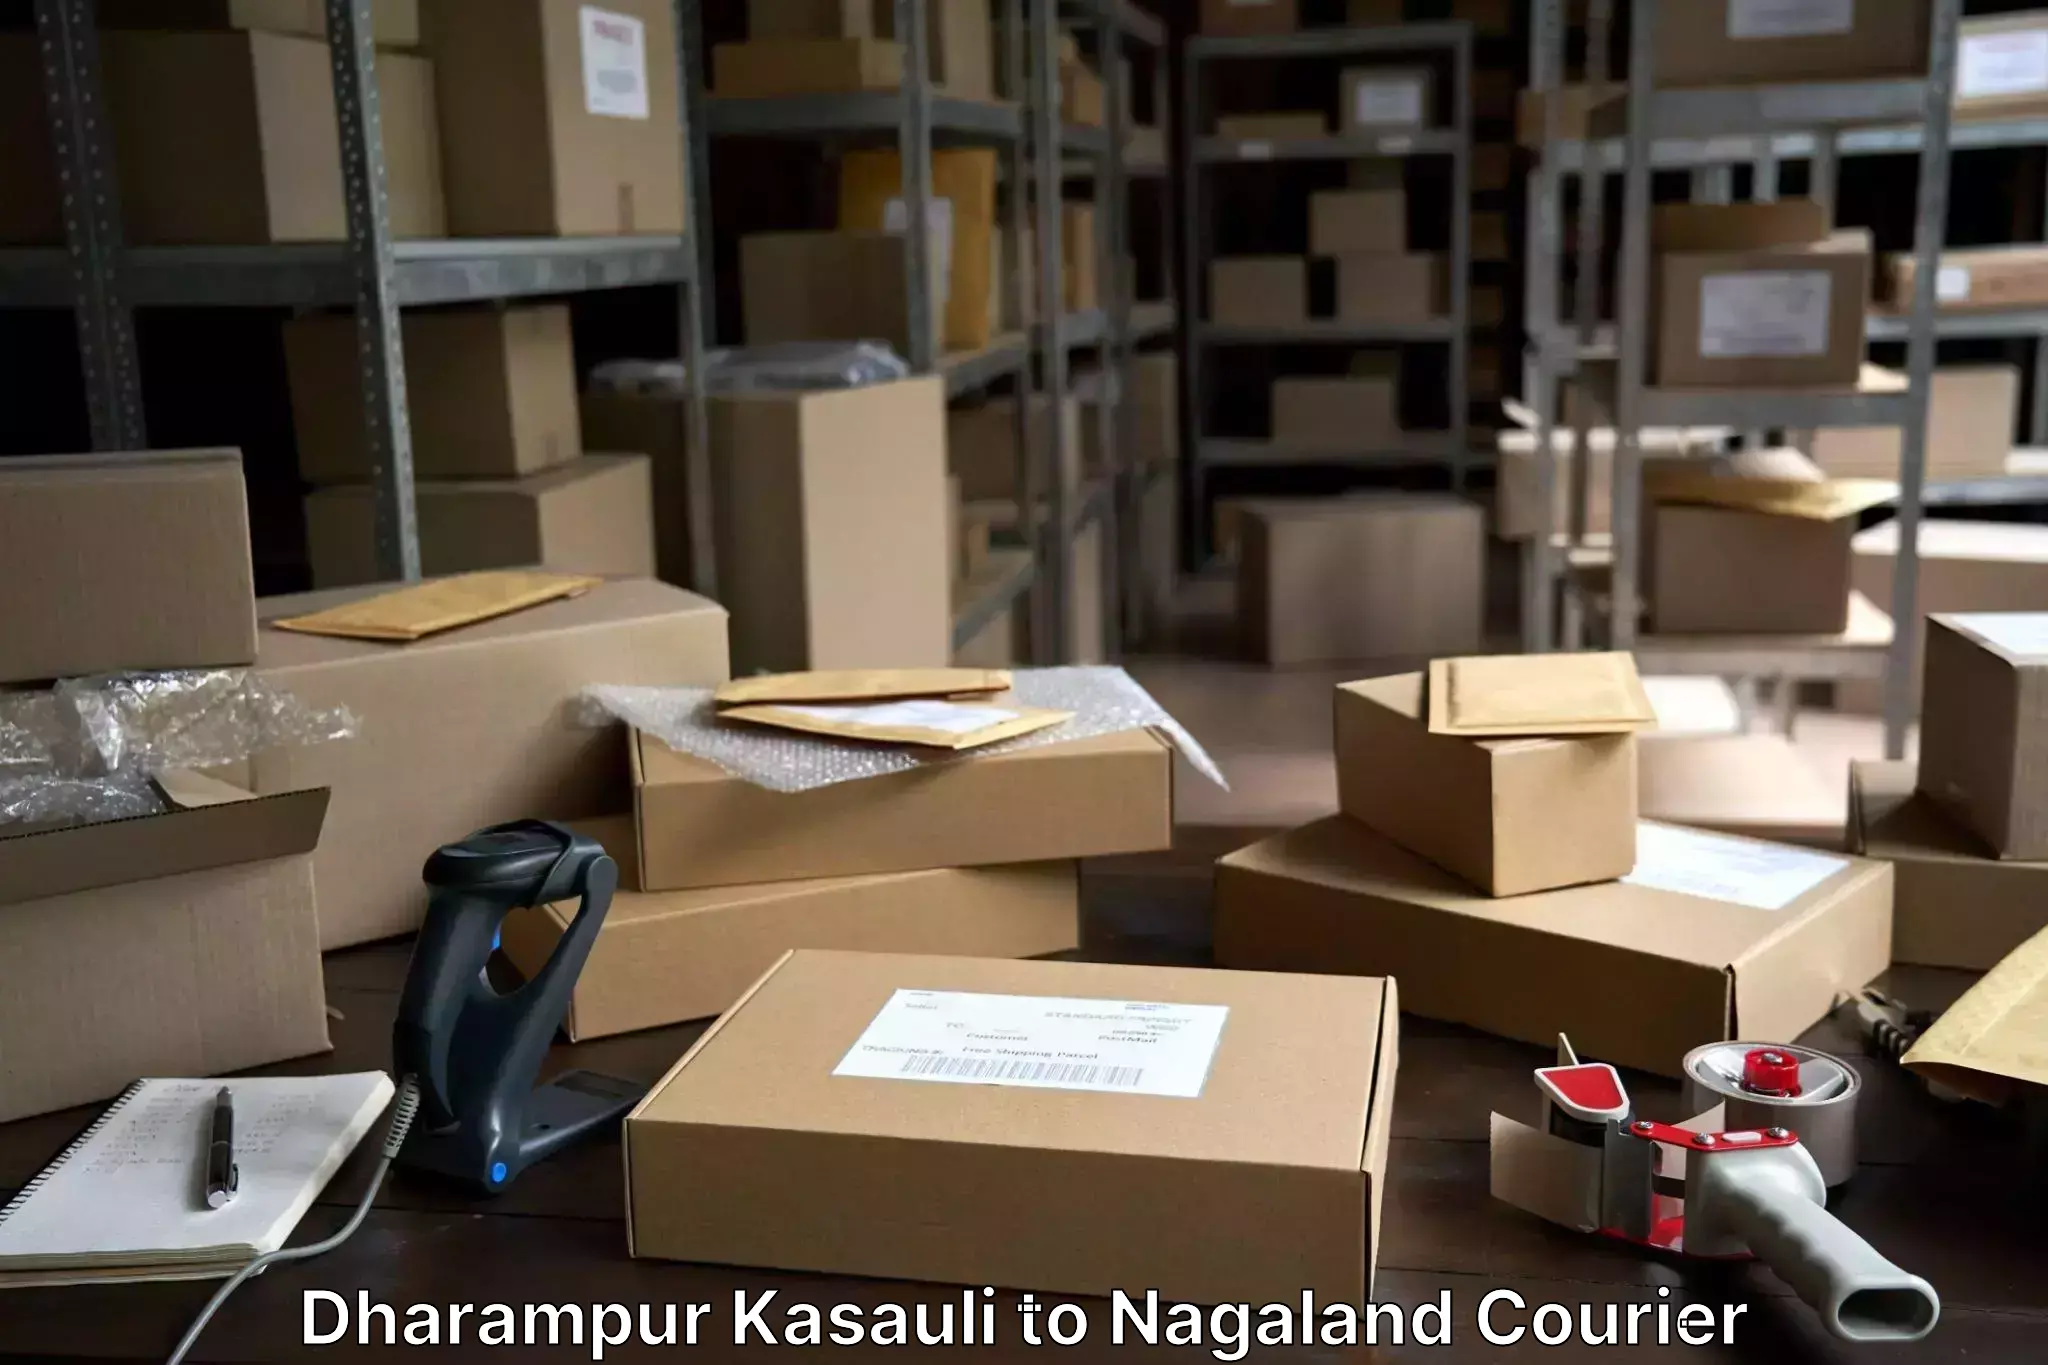 Luggage shipment specialists Dharampur Kasauli to Nagaland